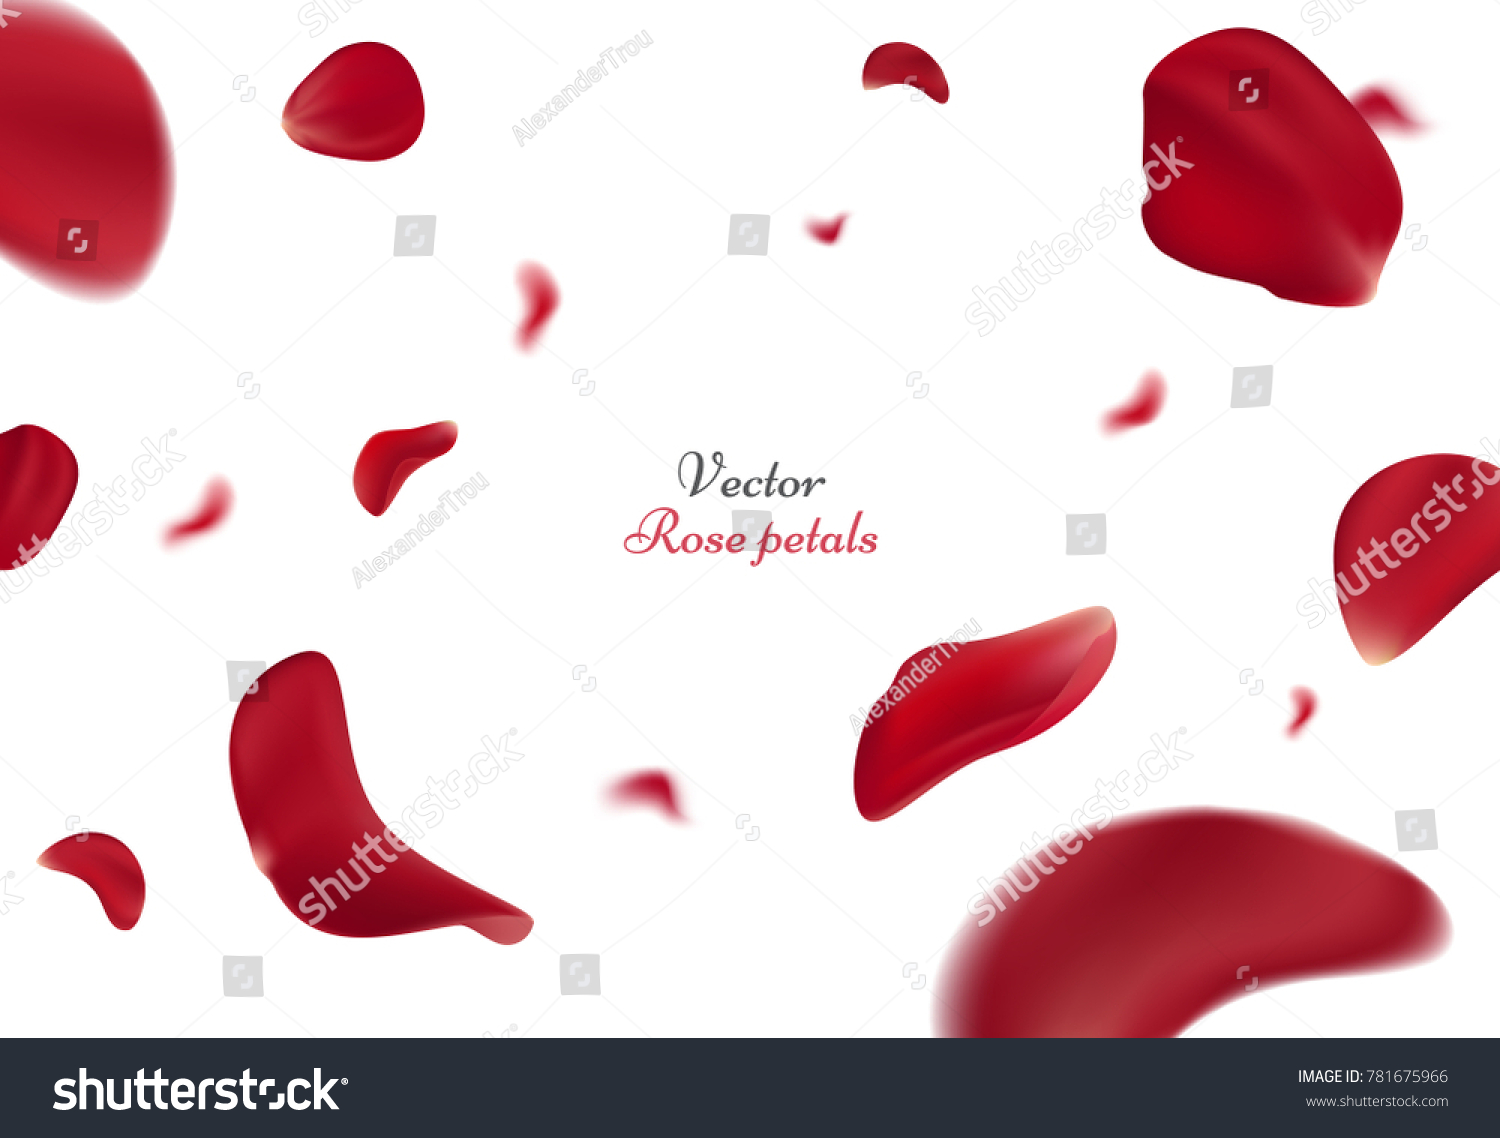 Falling red rose petals isolated on white background. Vector illustration with beauty roses petal, applicable for design of greeting cards on March 8 and St. Valentine's Day. Eps 10 #781675966